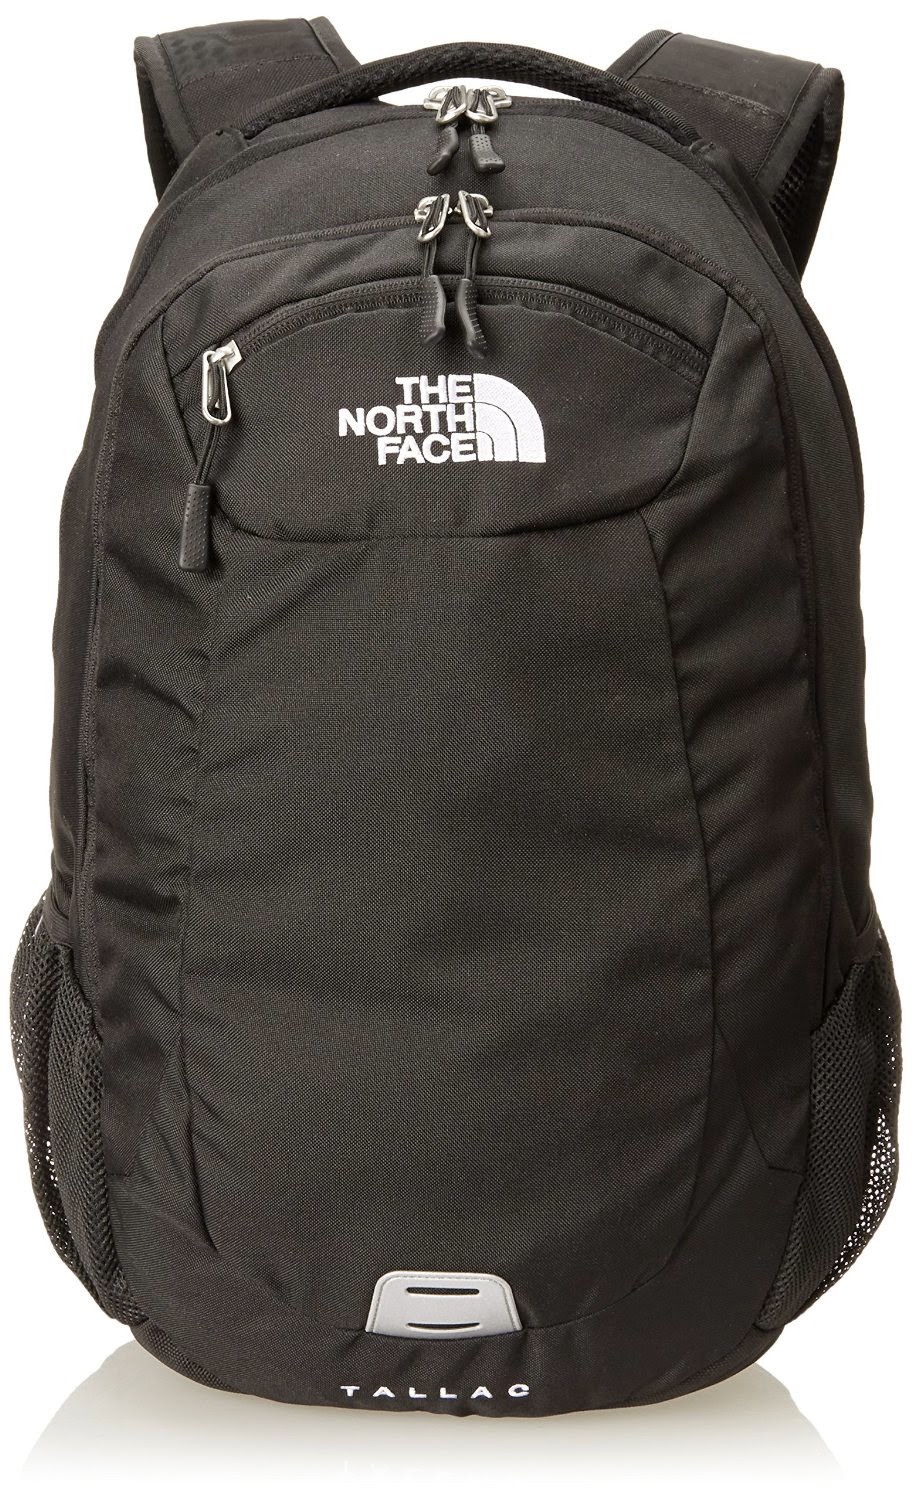 North Face Backpack The North Face Tallac